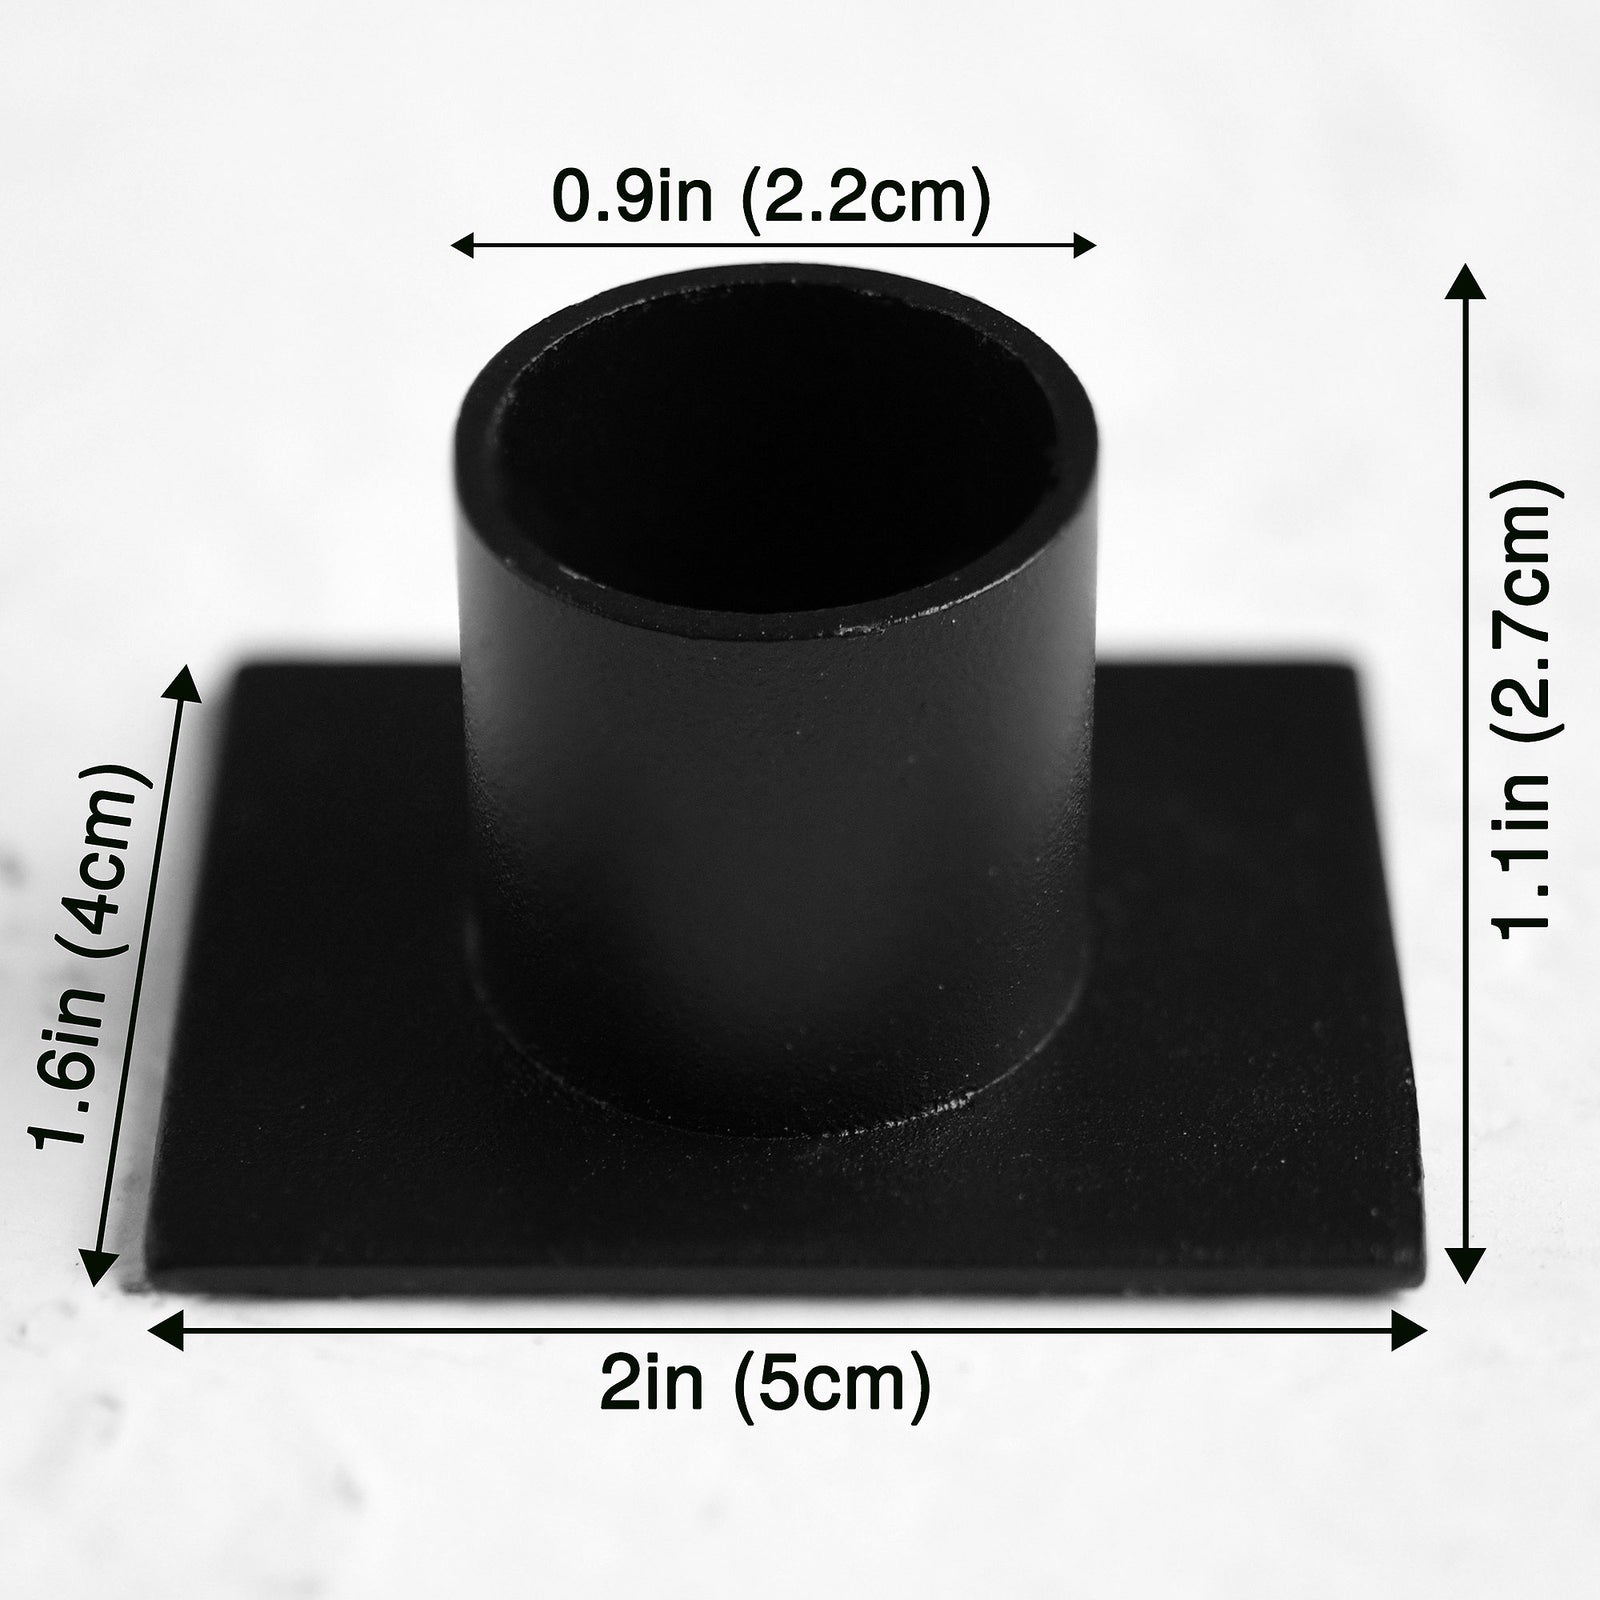 4 Black Plated Iron Candle Holders with Square Base for Taper Wax Candlesticks